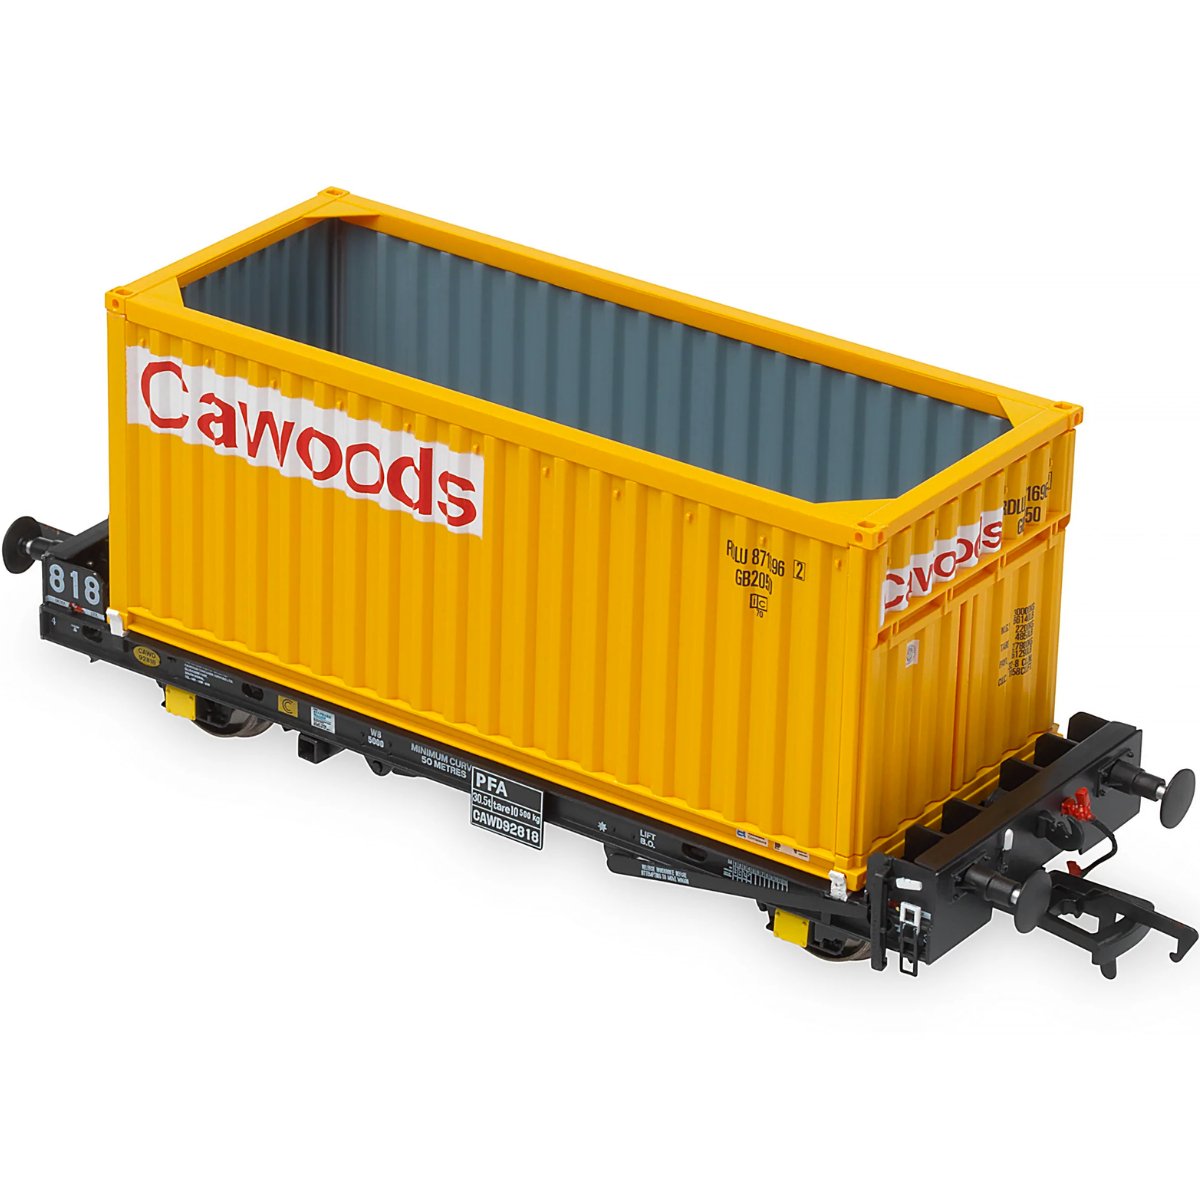 Accurascale PFA - Cawoods Coal Containers E - Phillips Hobbies